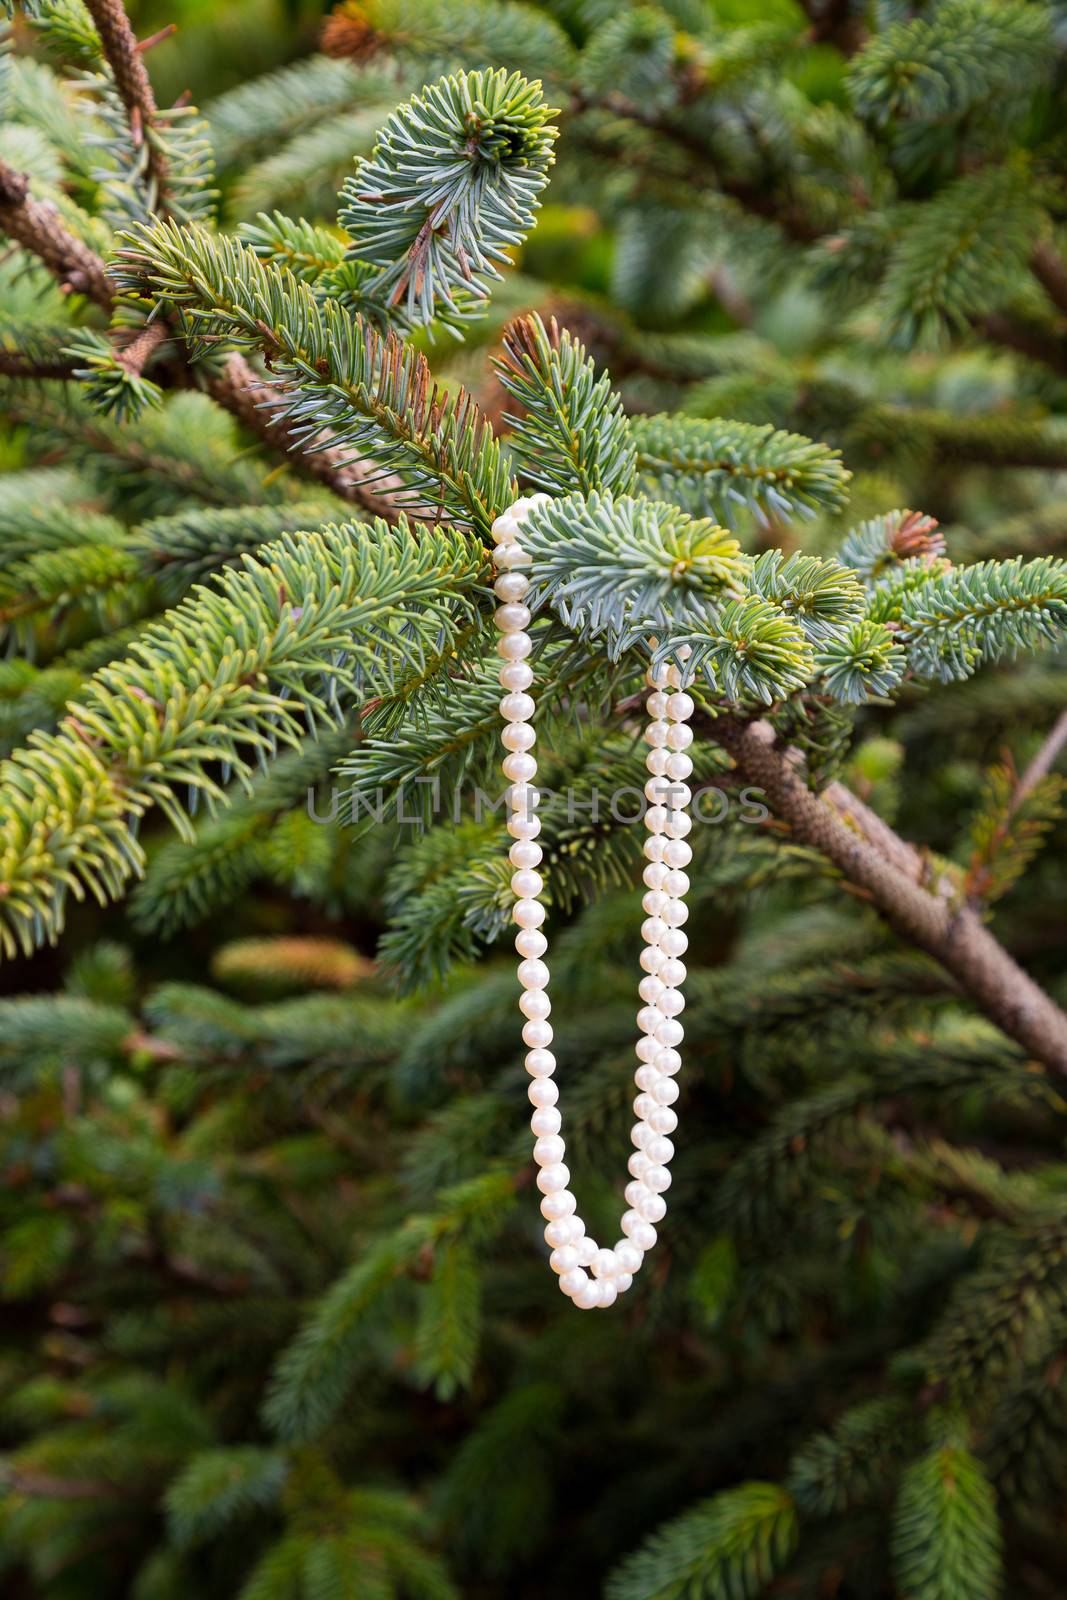 Pearl Necklace in Tree by joshuaraineyphotography